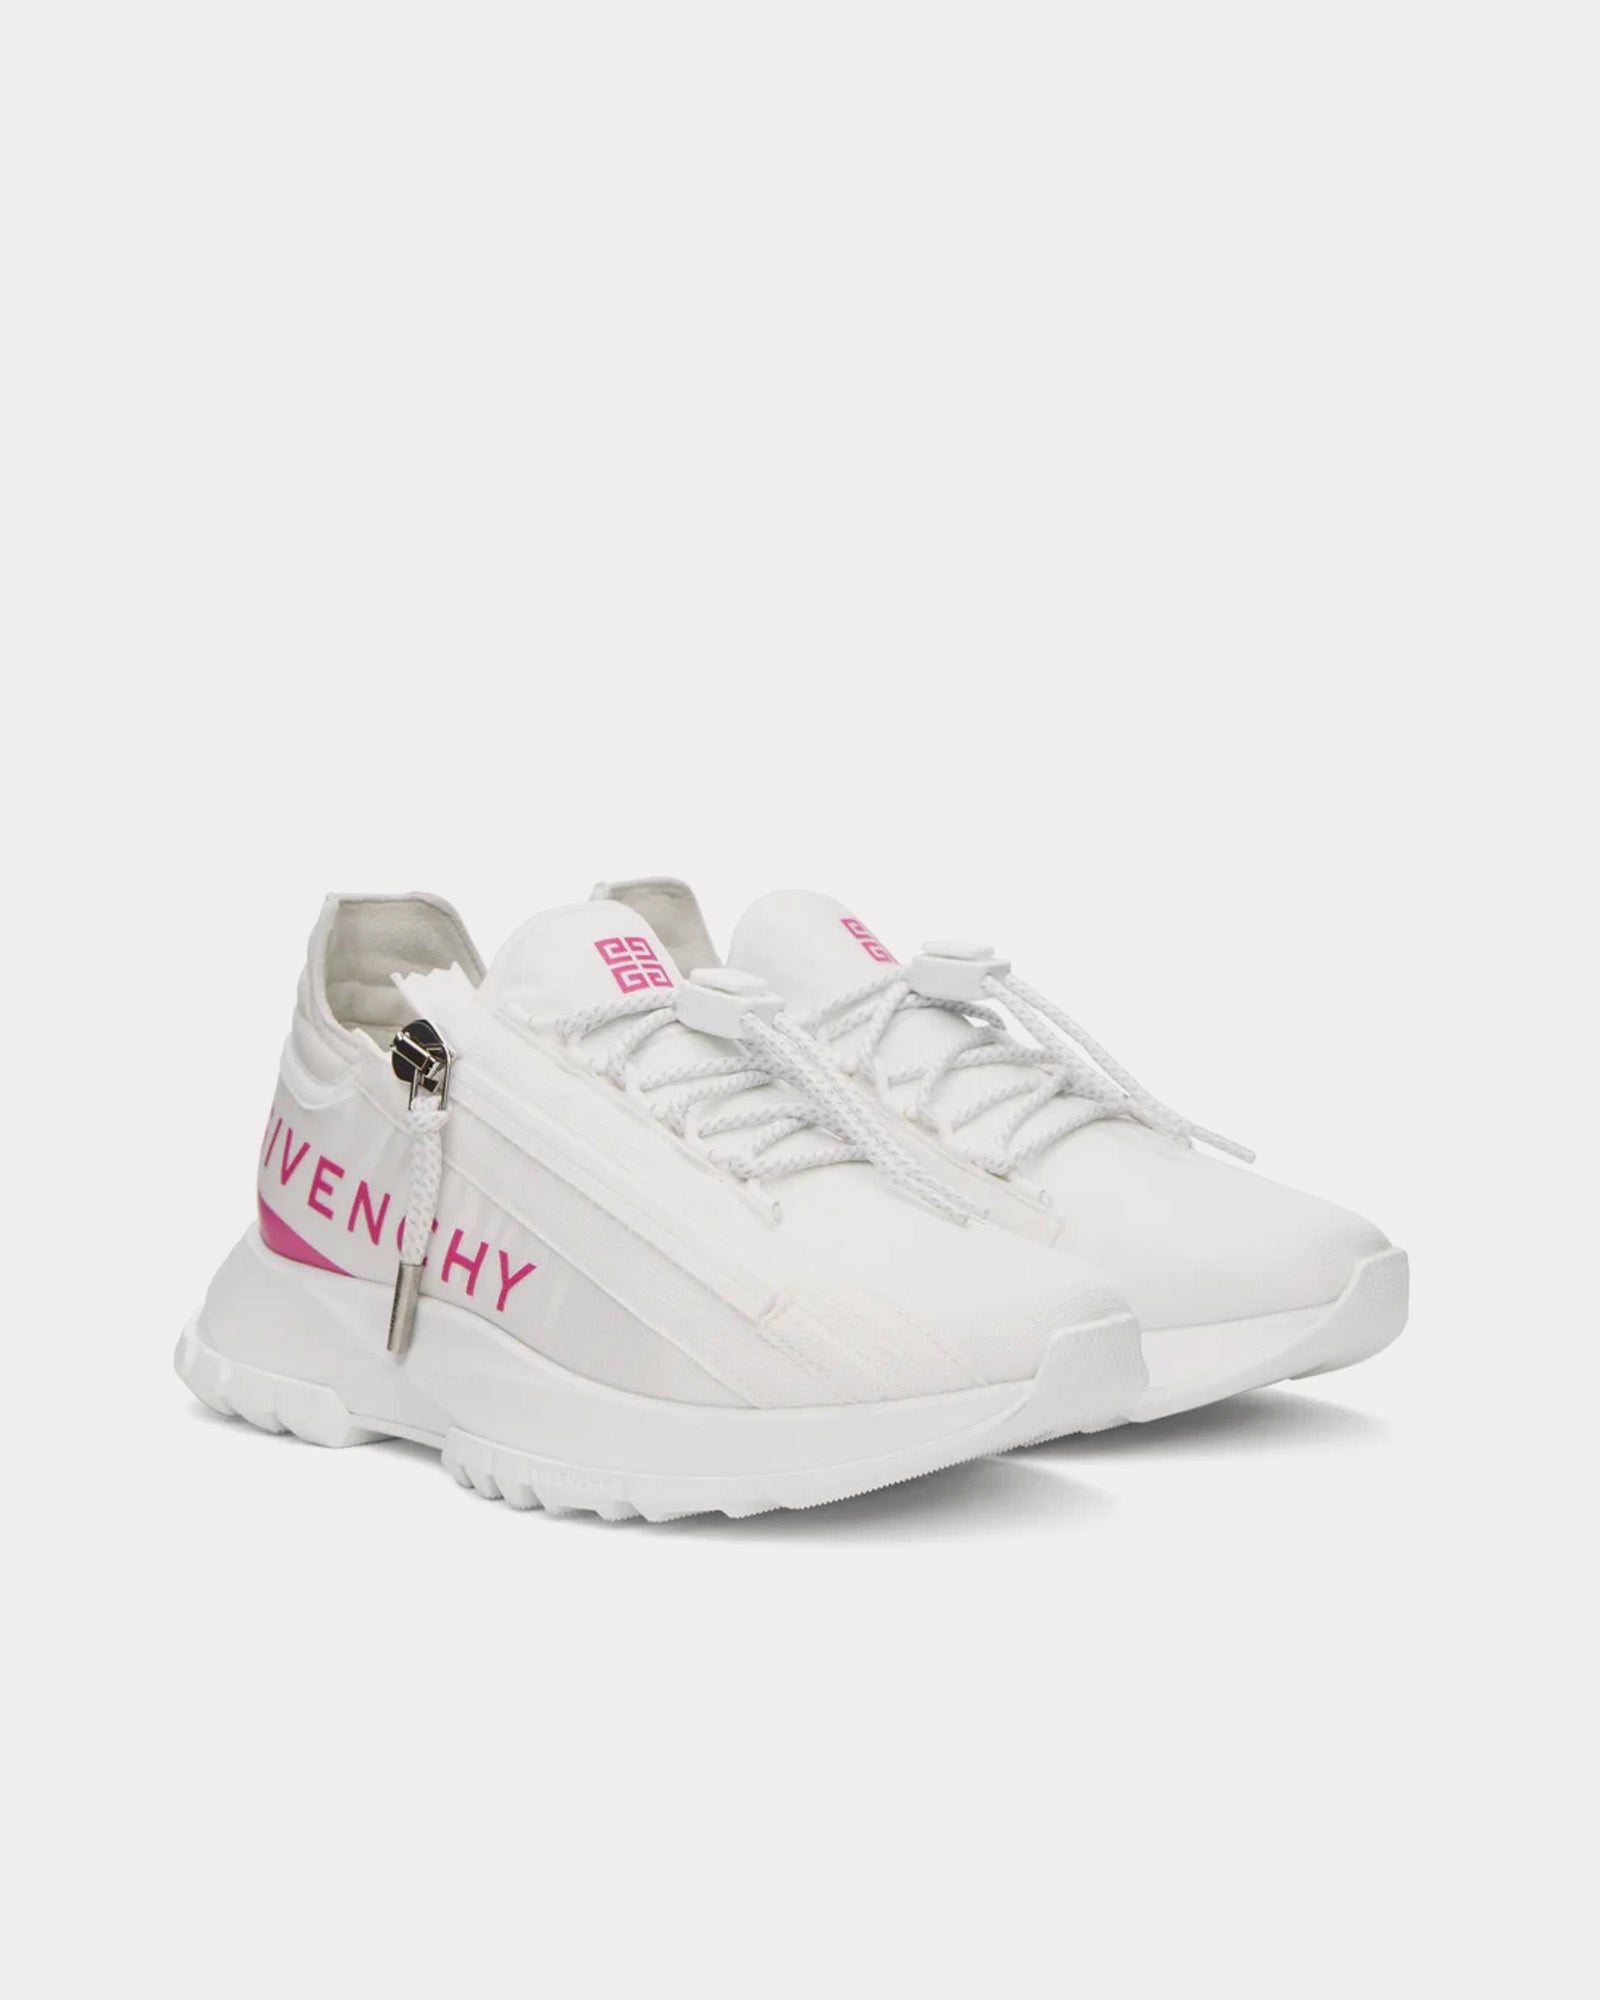 Givenchy - Spectre Runner Leather With Zip White / Pink Low Top Sneakers